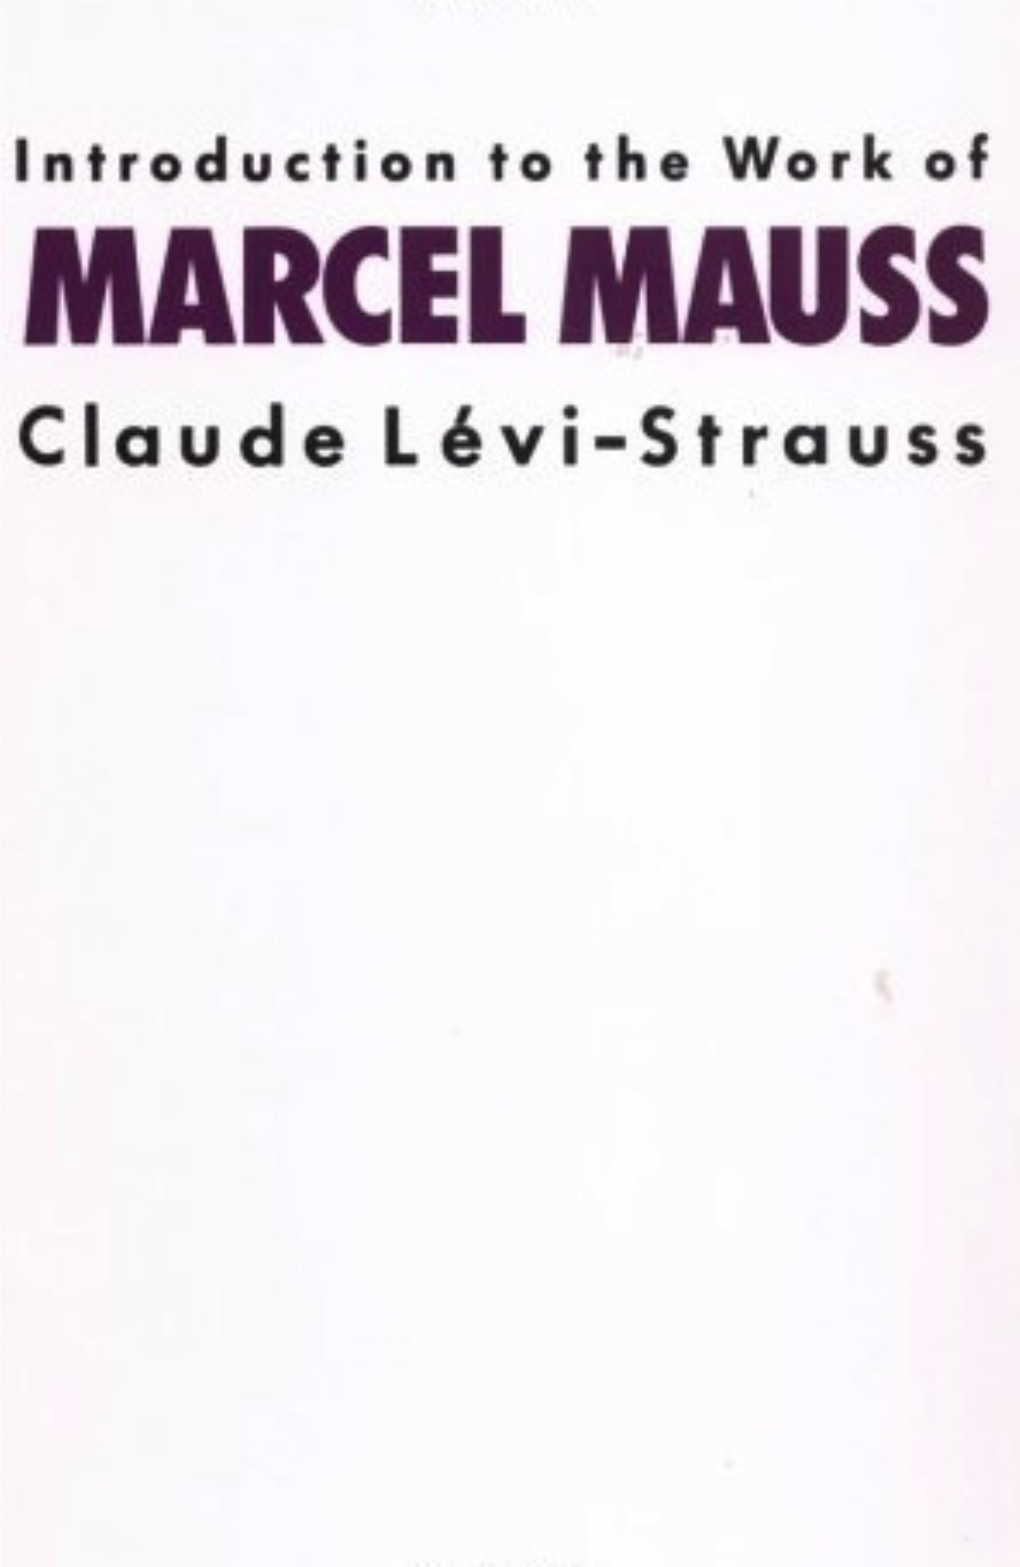 Introduction to the Work of MARCEL MAUSS Claude Lévi-Strauss